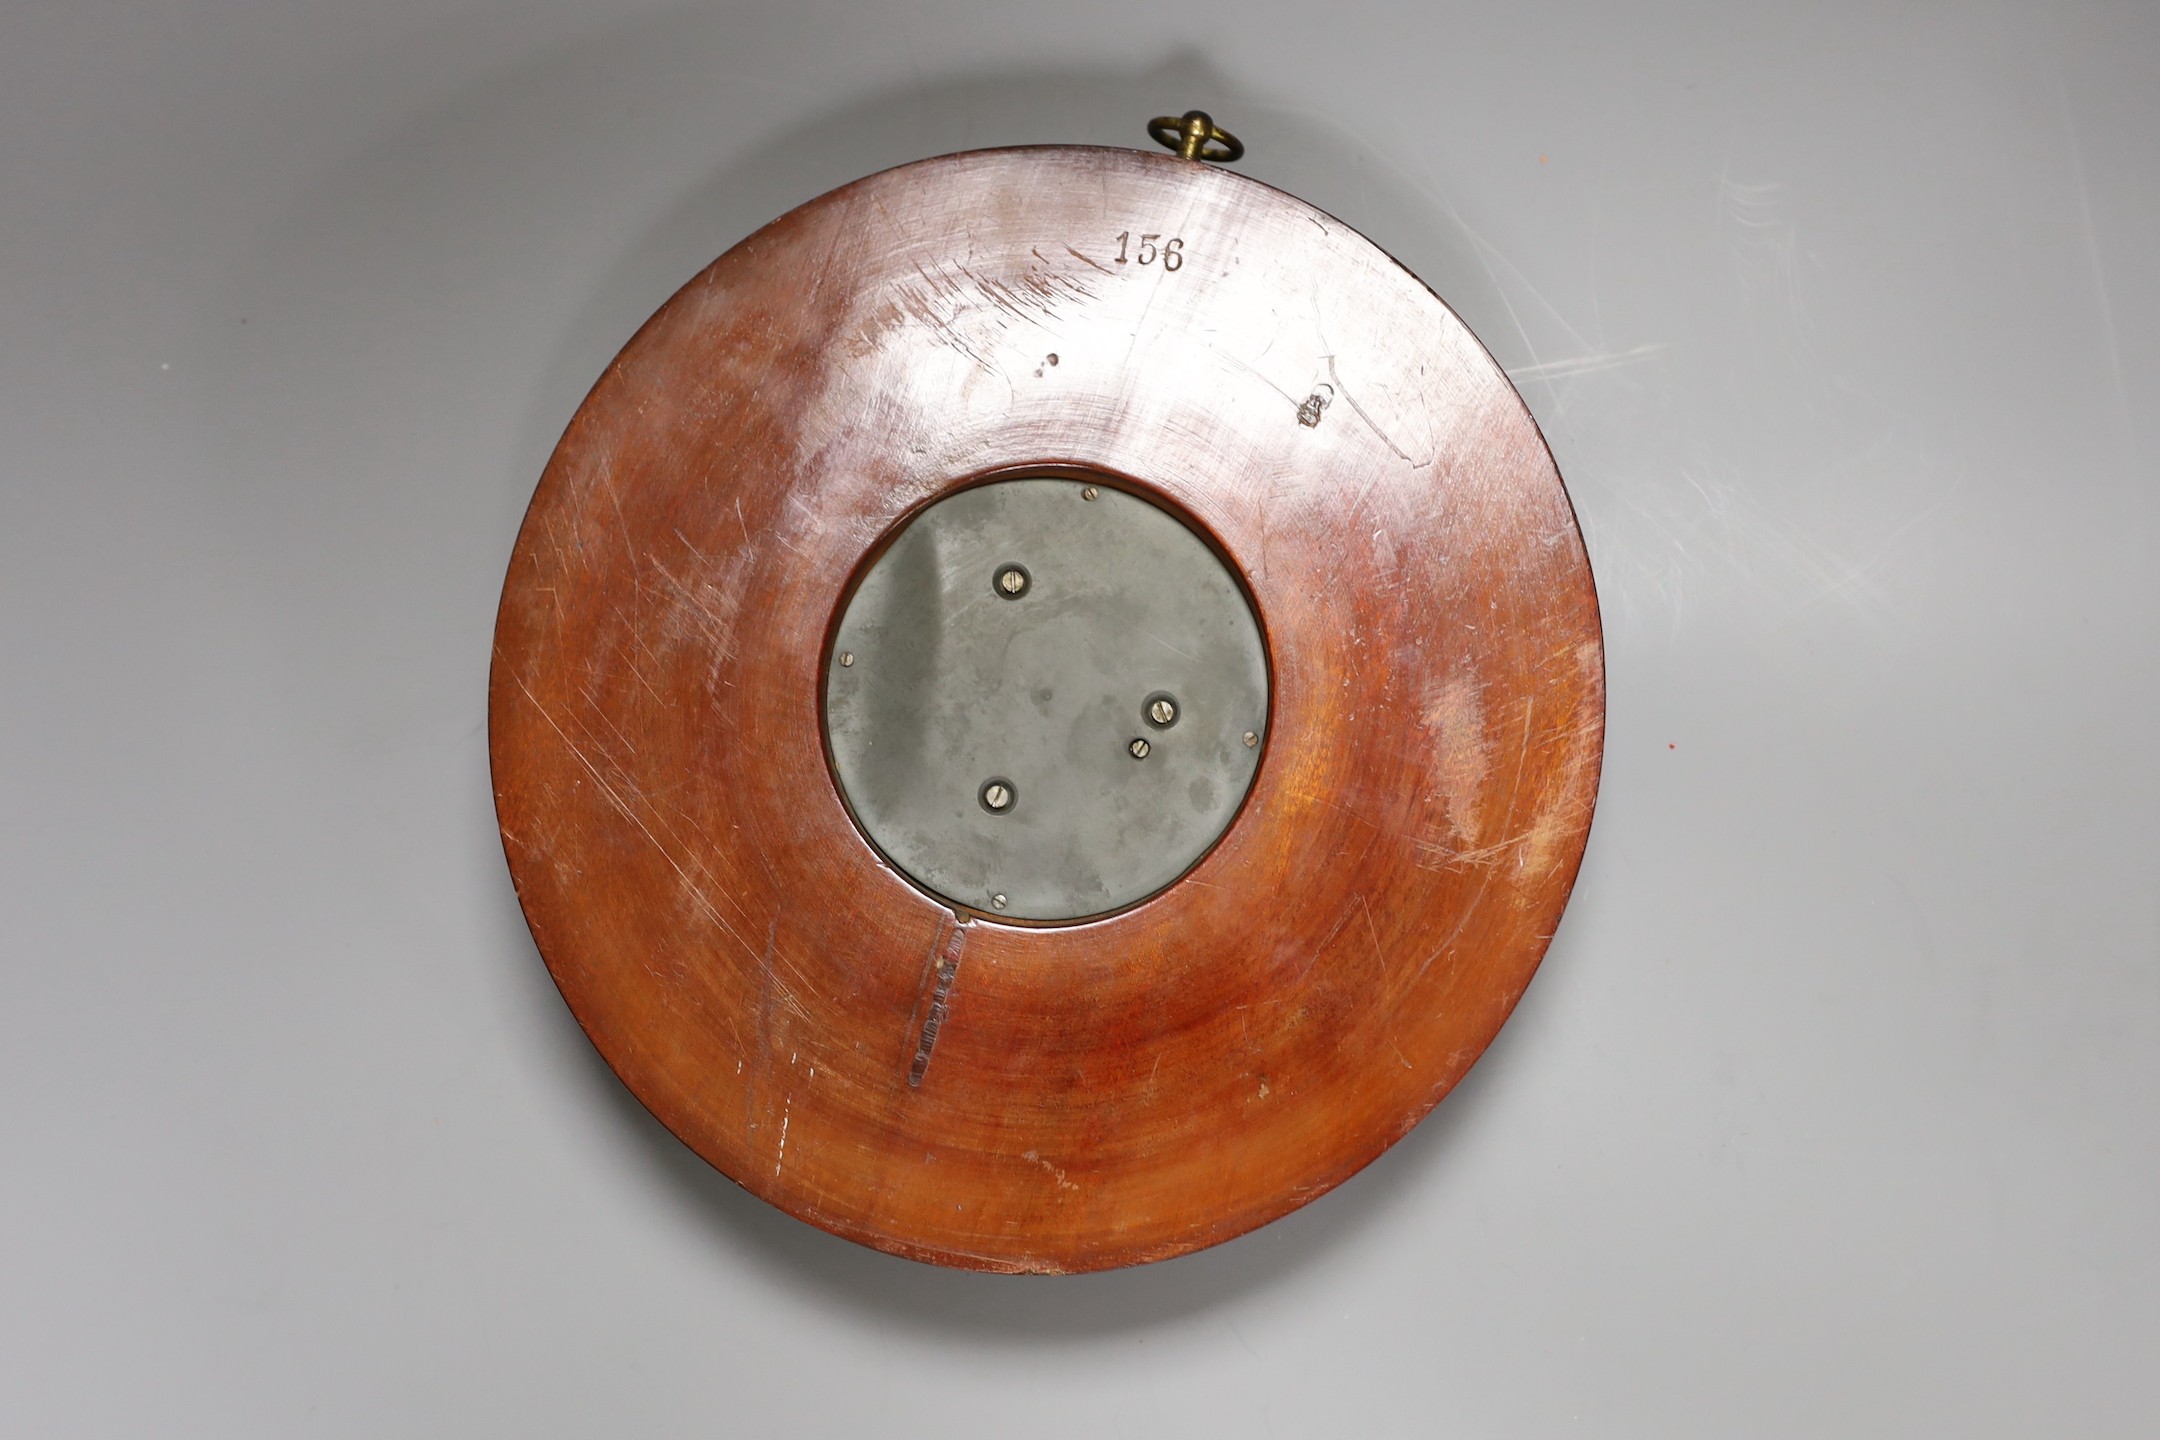 A Victorian aneroid barometer with mother-of-pearl inlaid decoration, 27cm diameter - Image 2 of 2